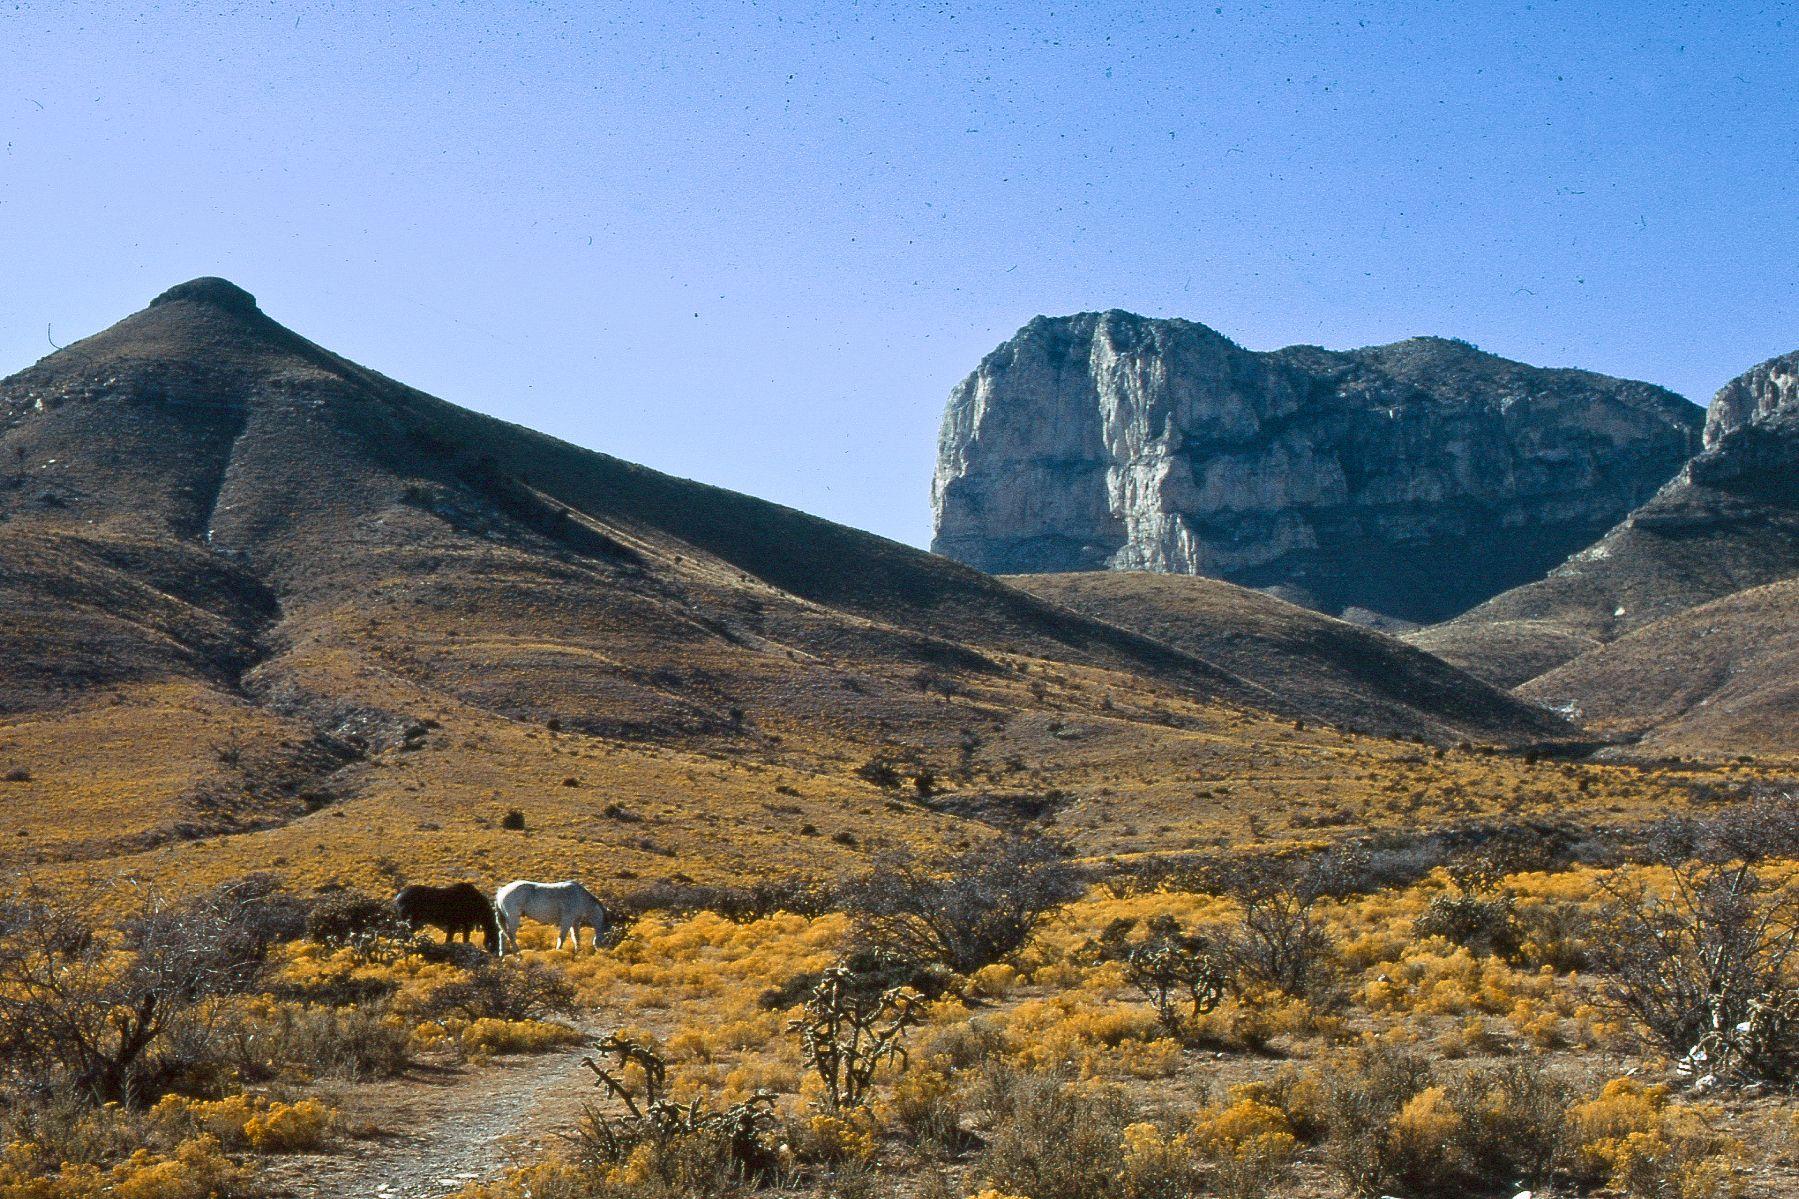 Guadalupe Mountains National Park Park in Texas